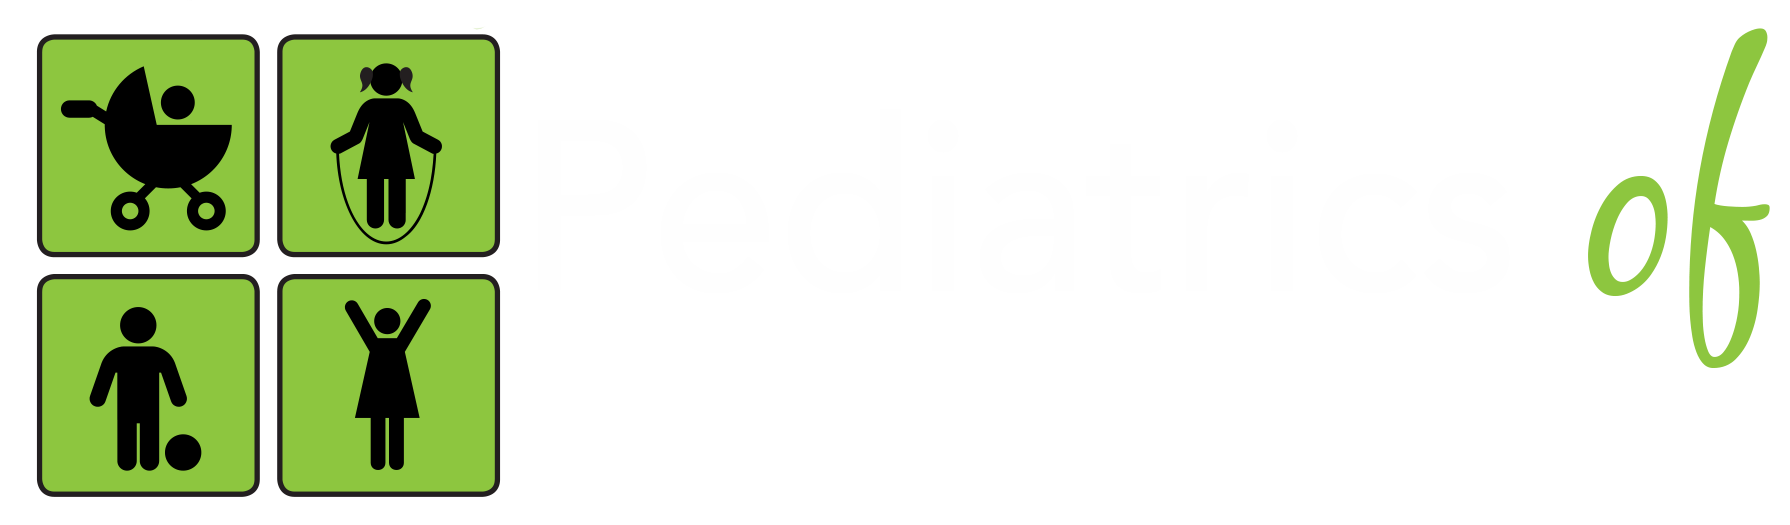 Pediatrics in southwest Houston with a footer.